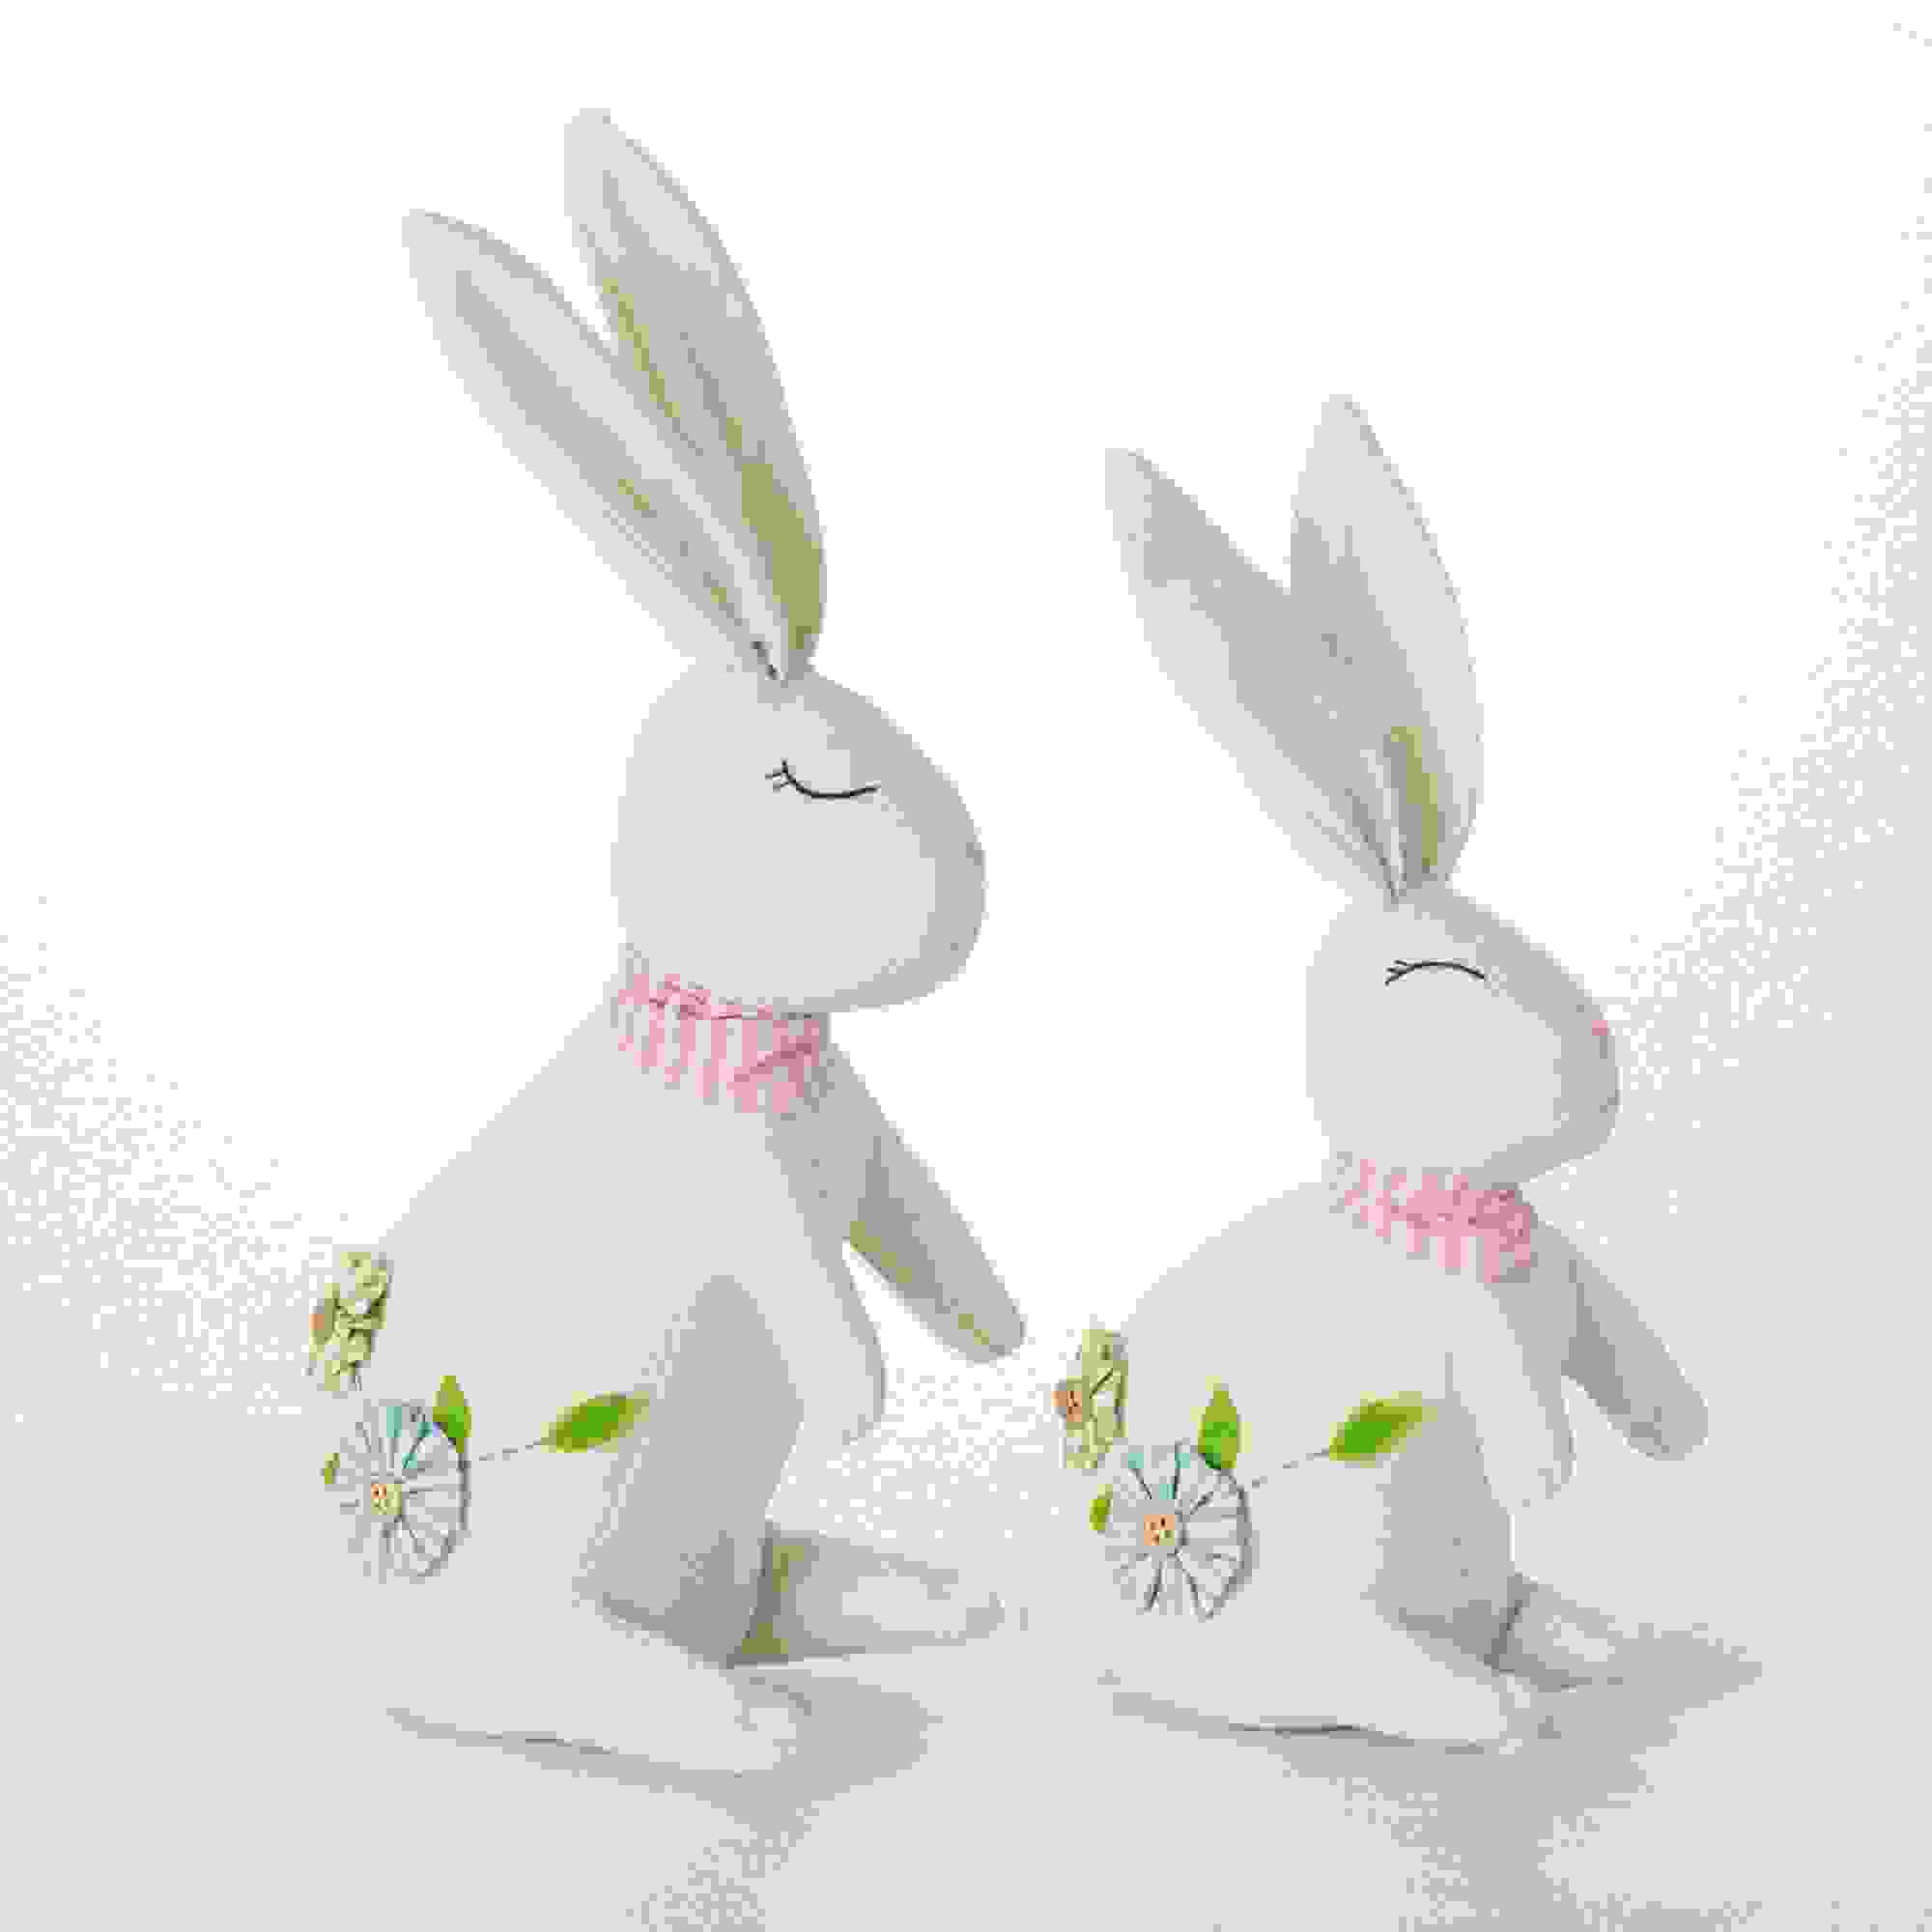 RESTING BUNNY CHARACTERS